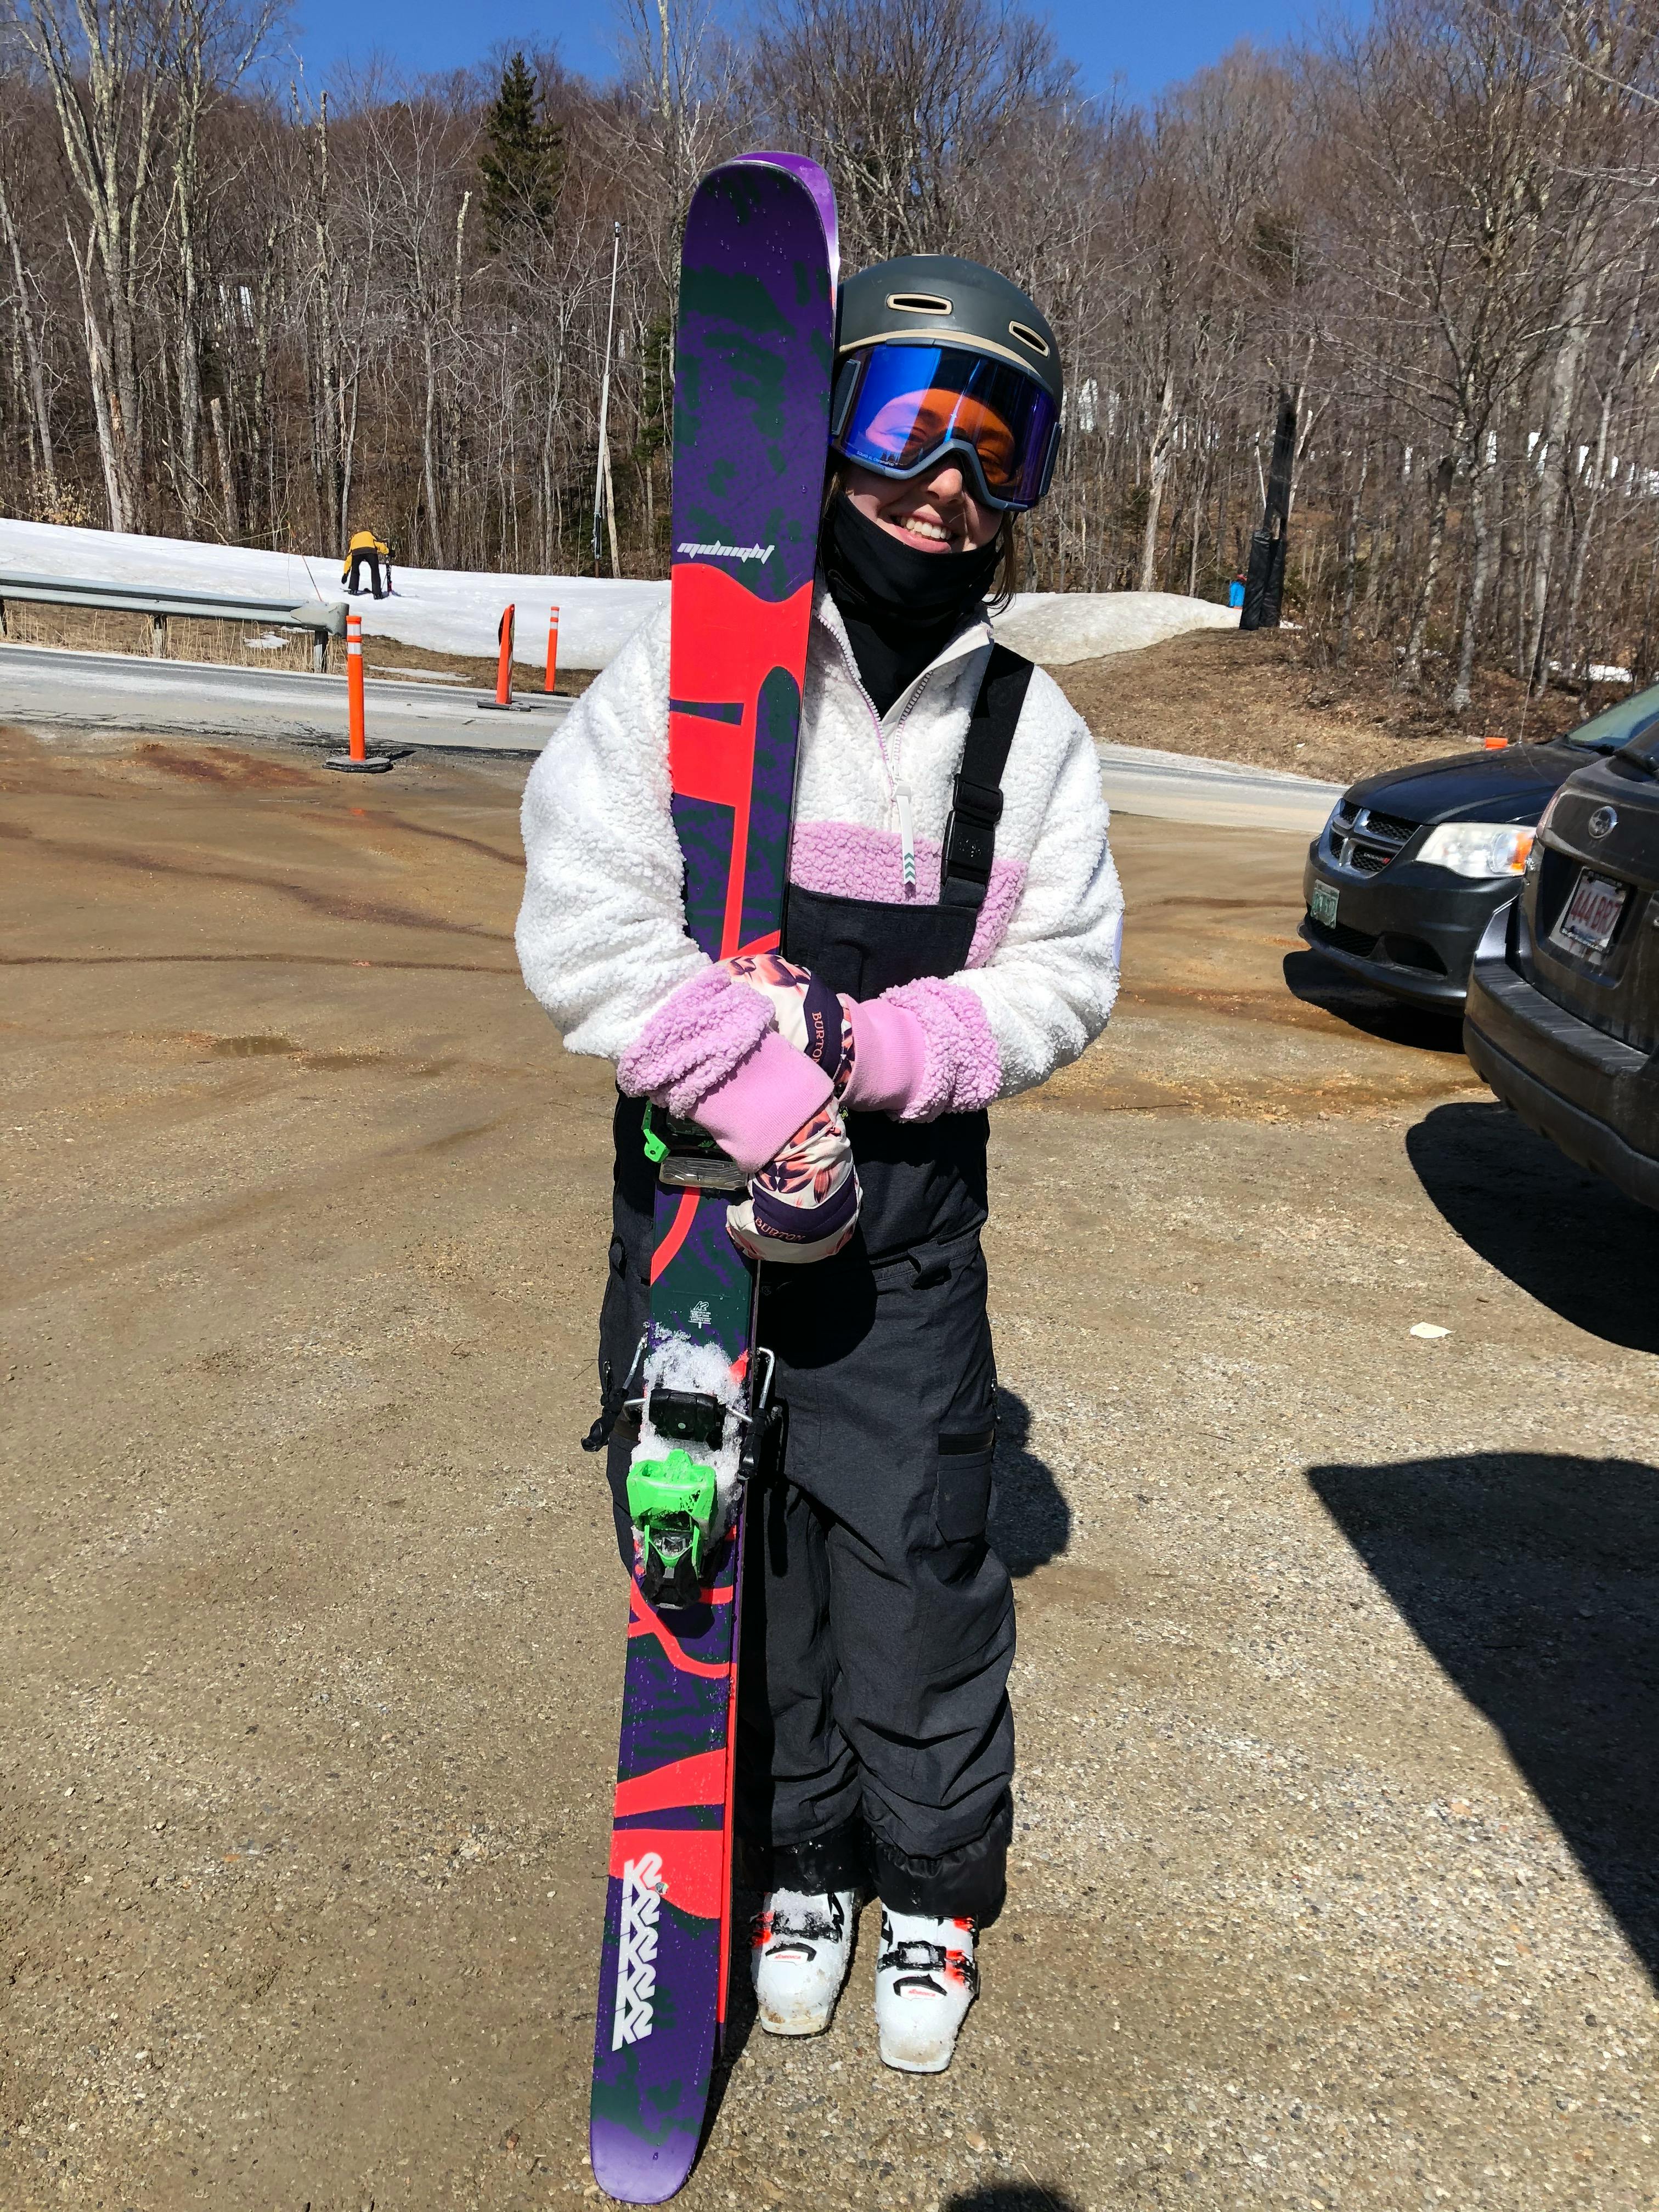 The author stands in the parking lot and smiles while holding her K2 skis. 